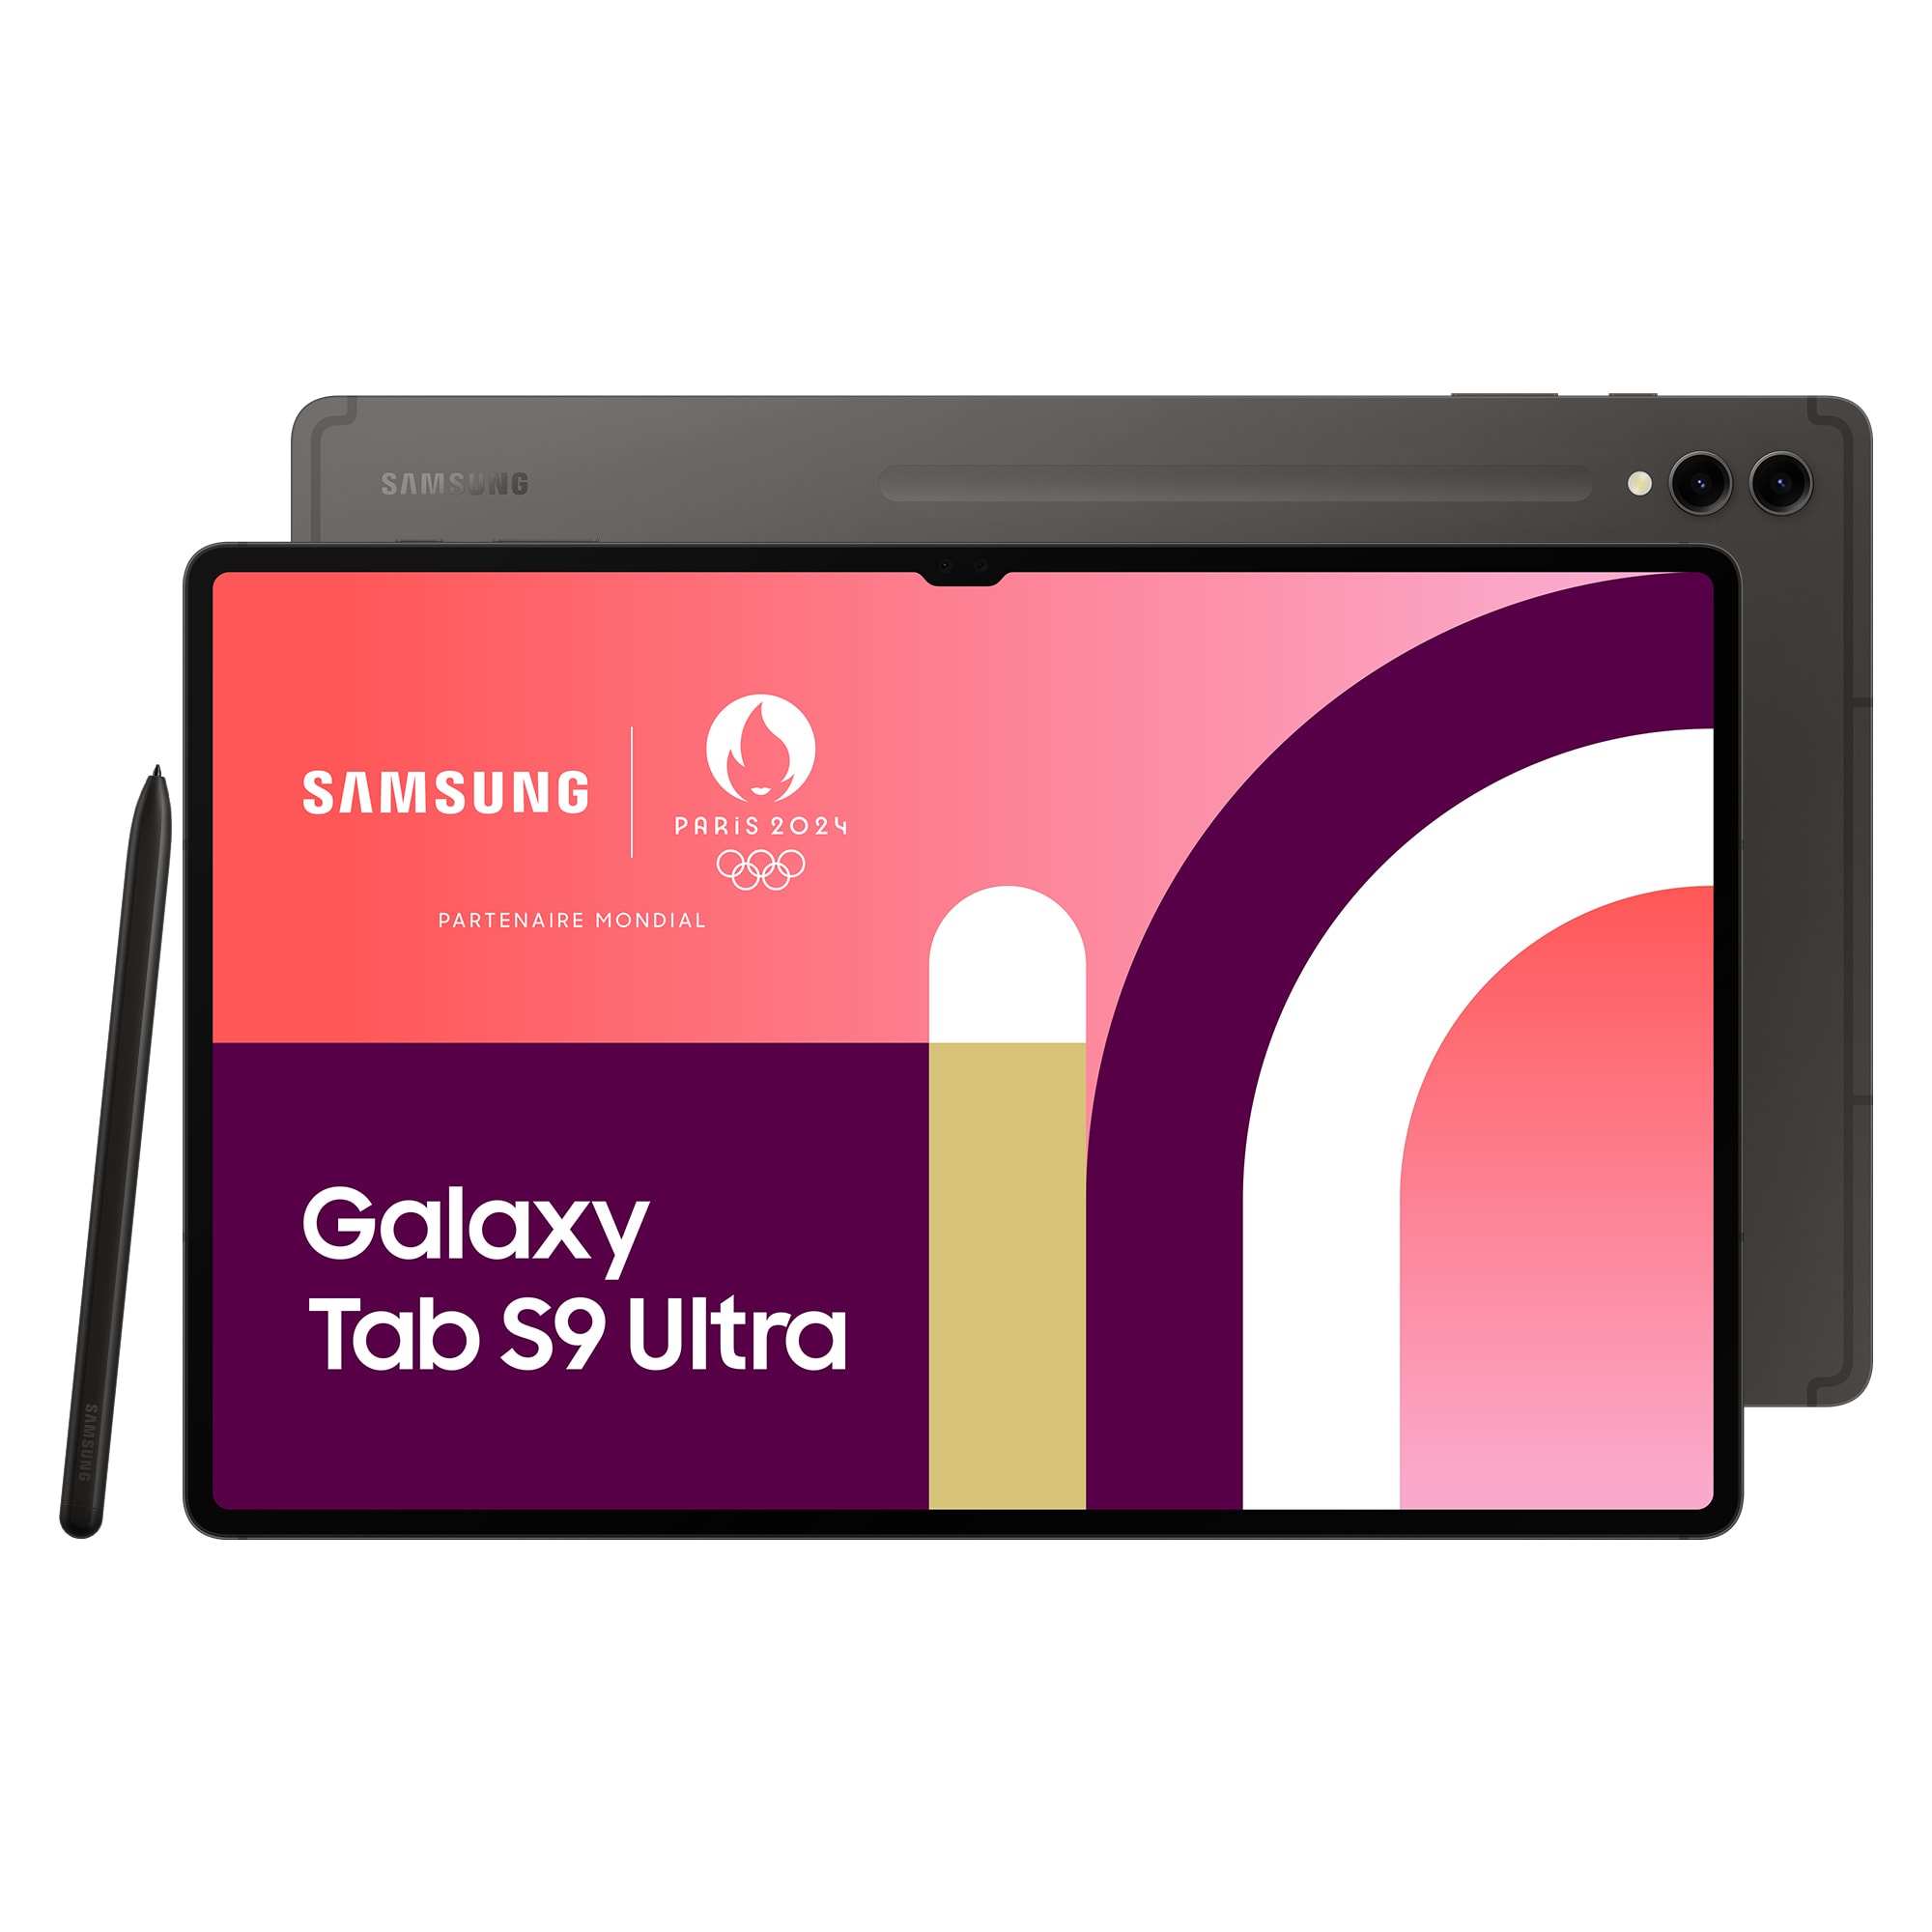 SAMSUNG Tablette tactile Galaxy Tab S9 Ultra WiFi 256Go Anthracite - SM-X910NZAAEUB